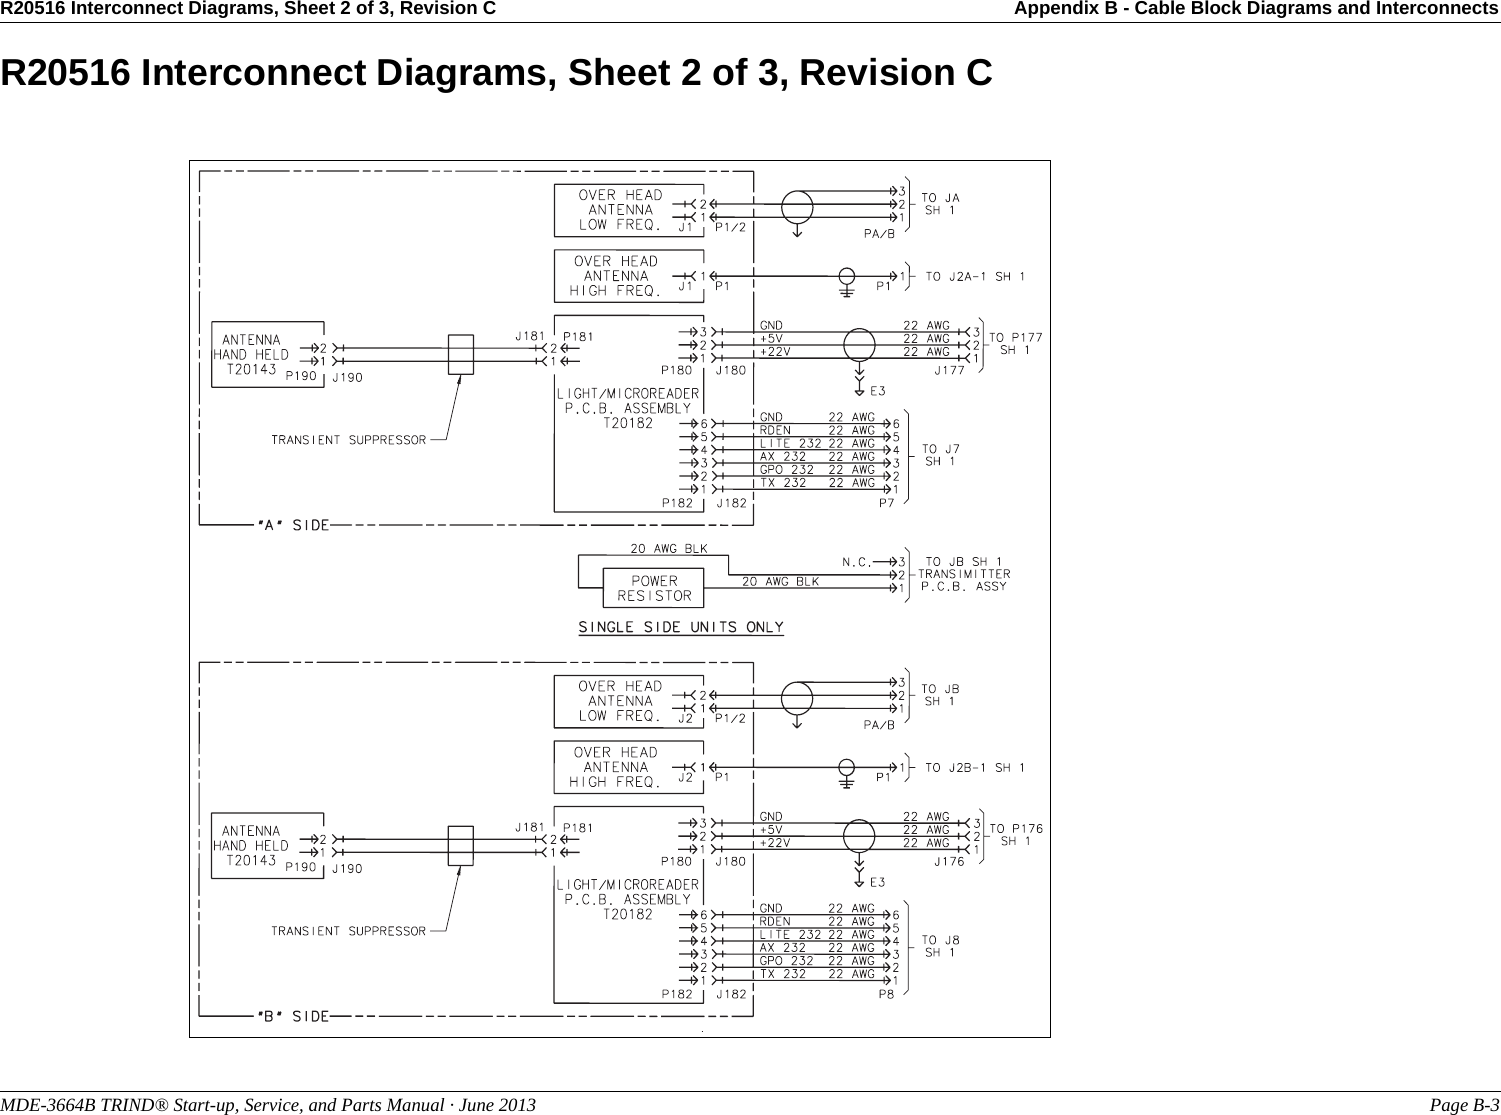 R20516 Interconnect Diagrams, Sheet 2 of 3, Revision C Appendix B - Cable Block Diagrams and InterconnectsMDE-3664B TRIND® Start-up, Service, and Parts Manual · June 2013 Page B-3R20516 Interconnect Diagrams, Sheet 2 of 3, Revision C